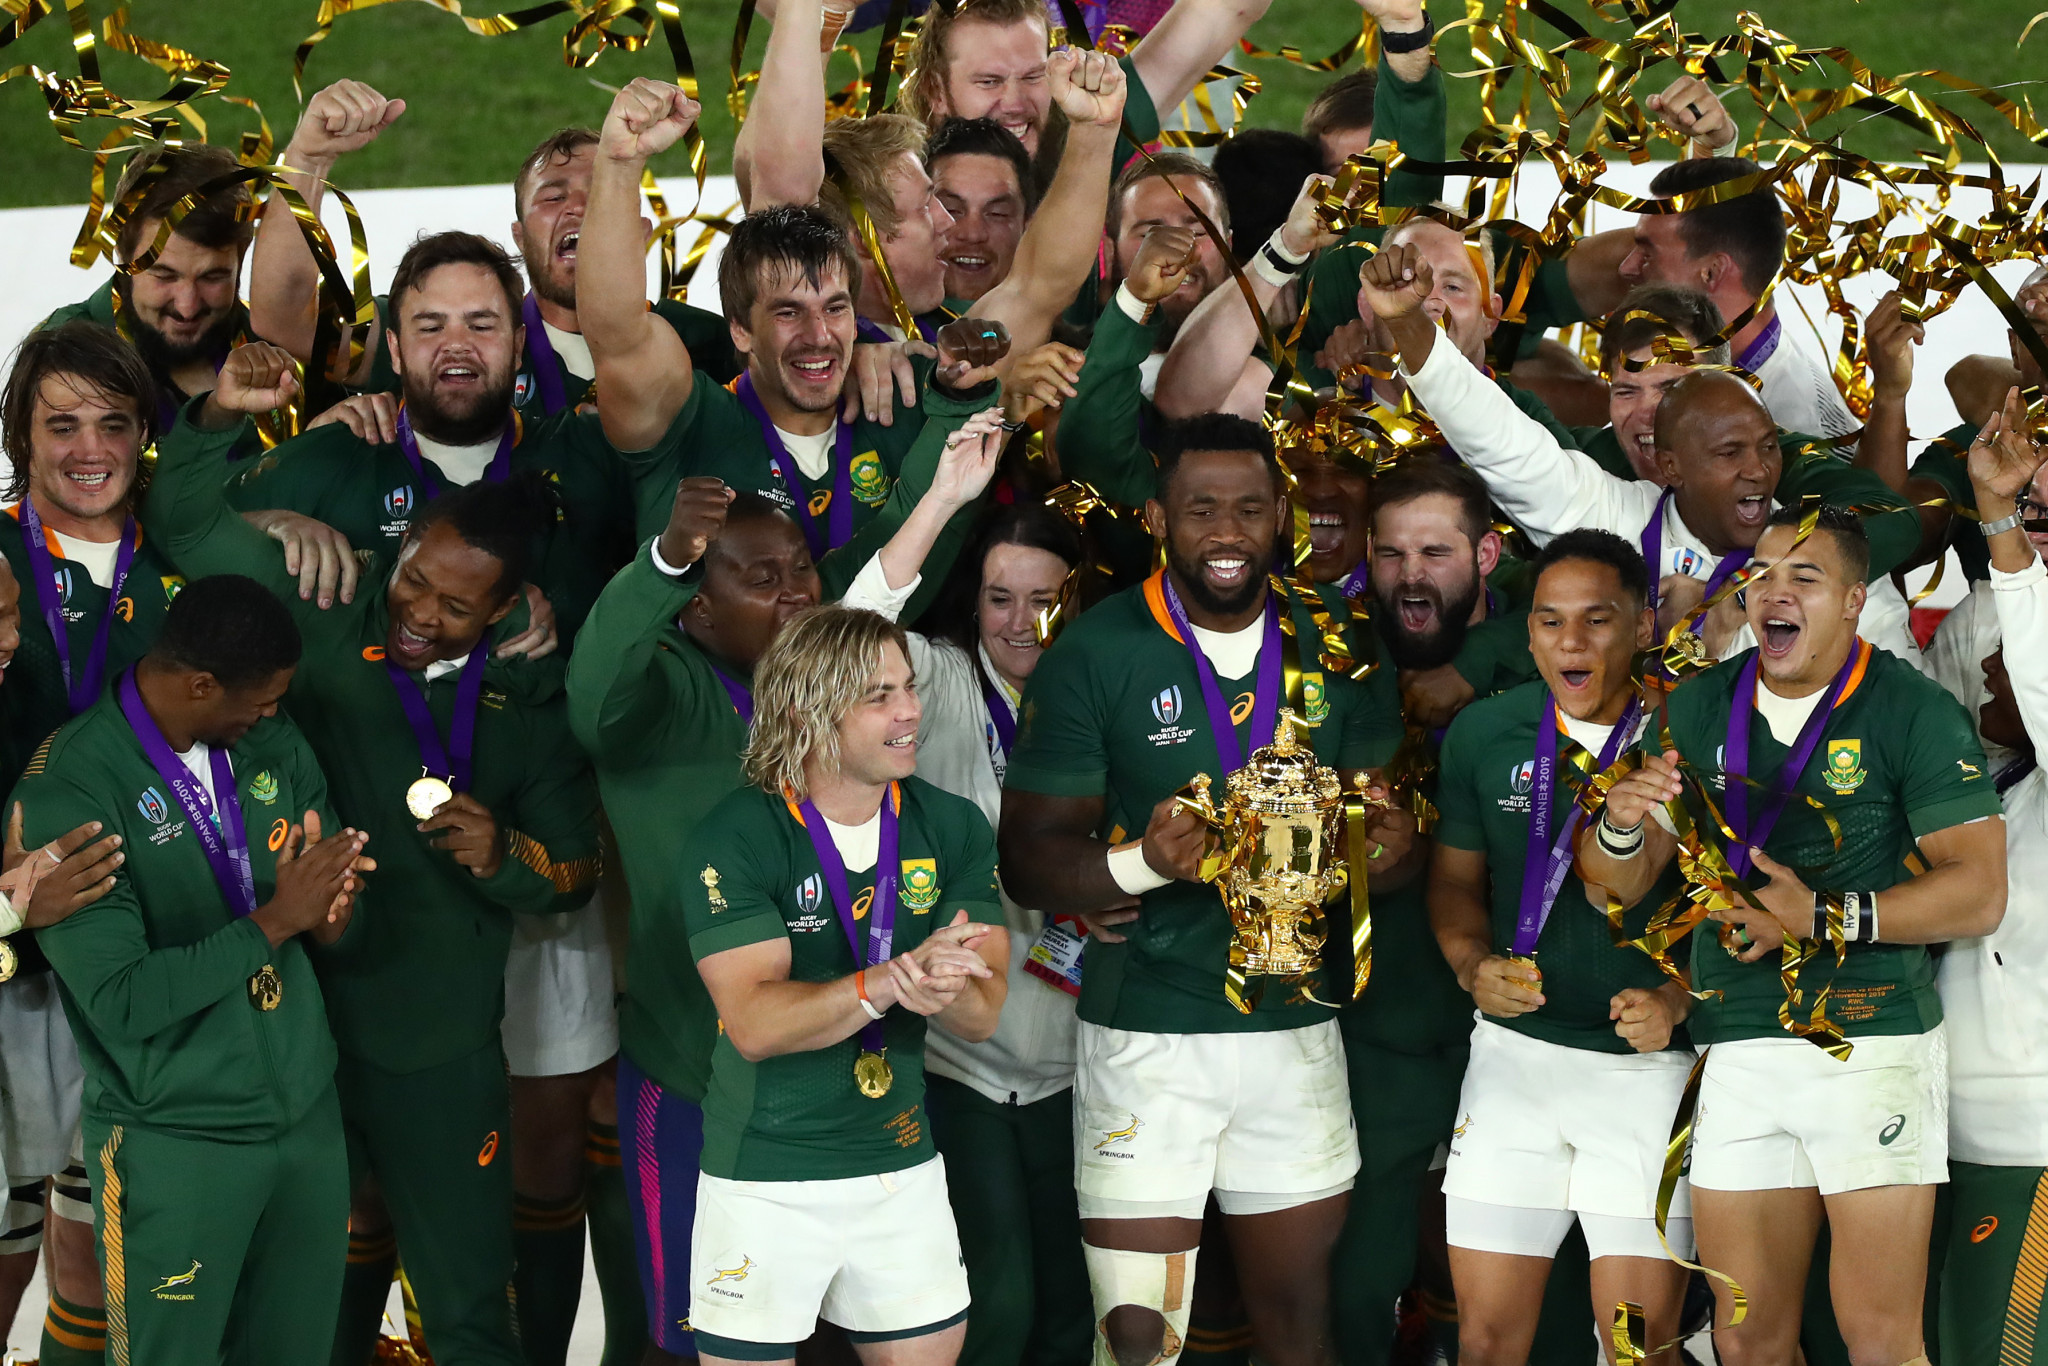 Rugby World Cup success leaves legacy and support for Tokyo 2020, report says